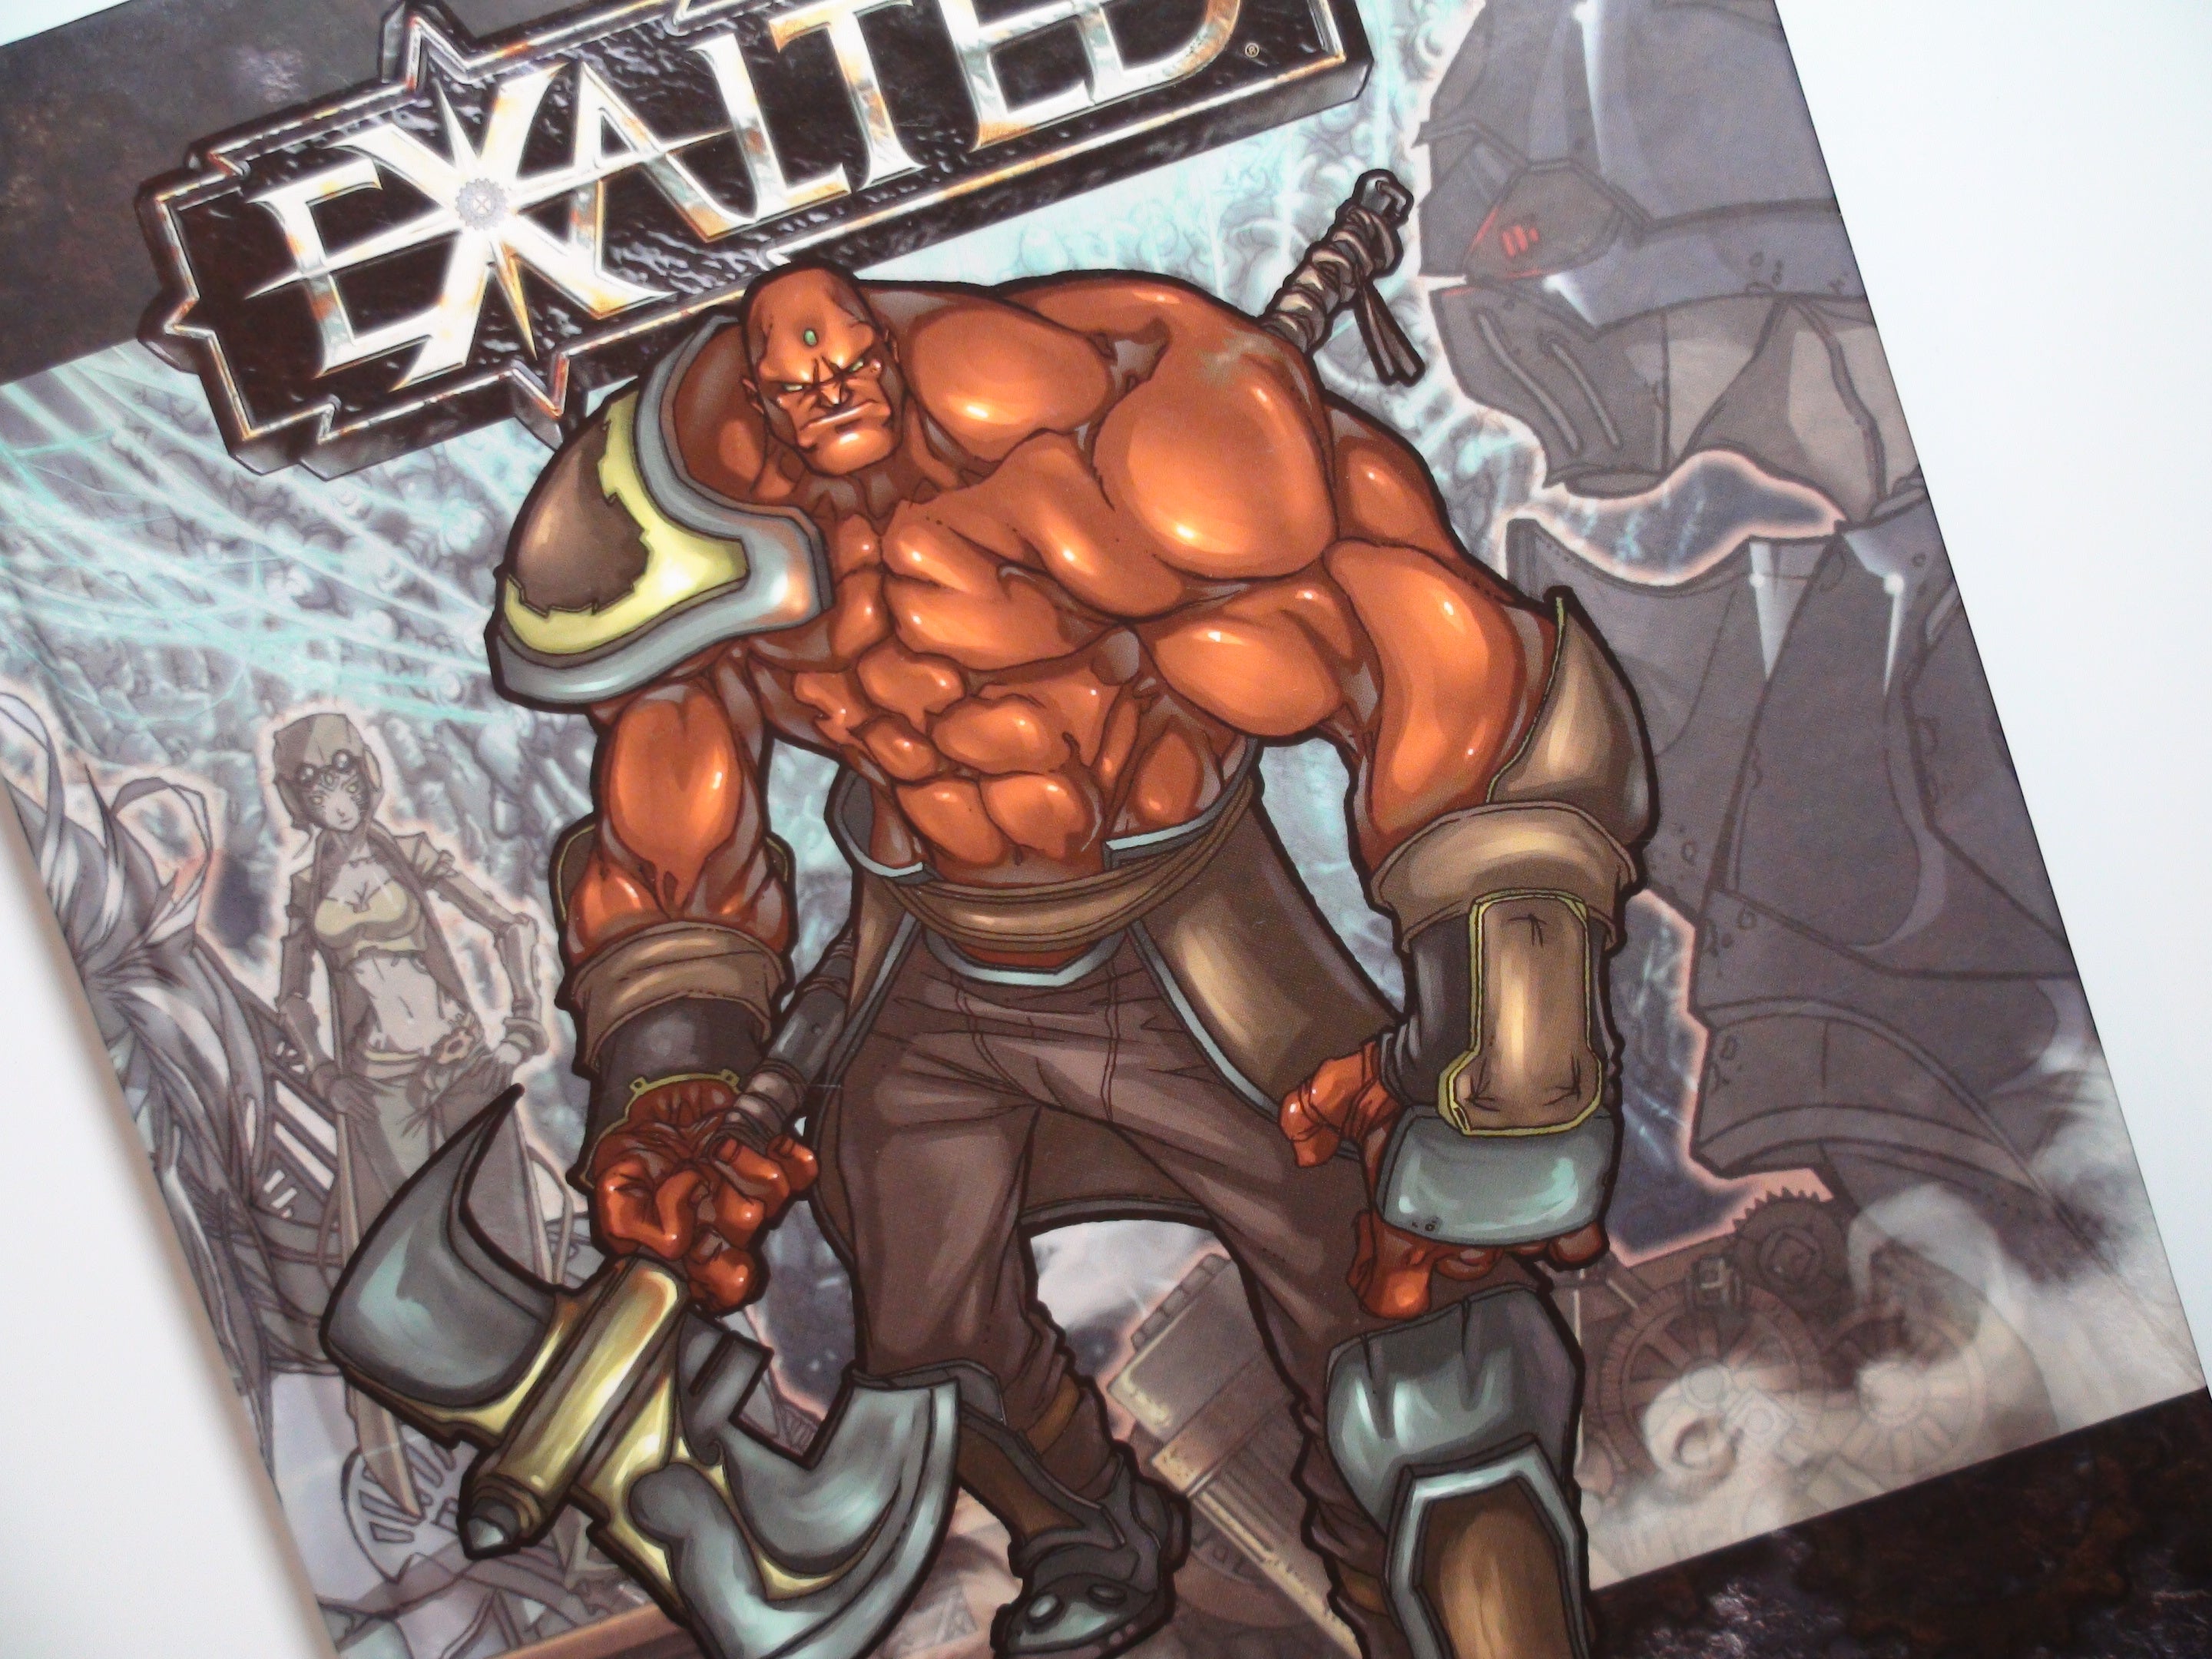 Exalted, The Autochthonians, White Wolf RPG, WW8816, 1st Ed, 2005